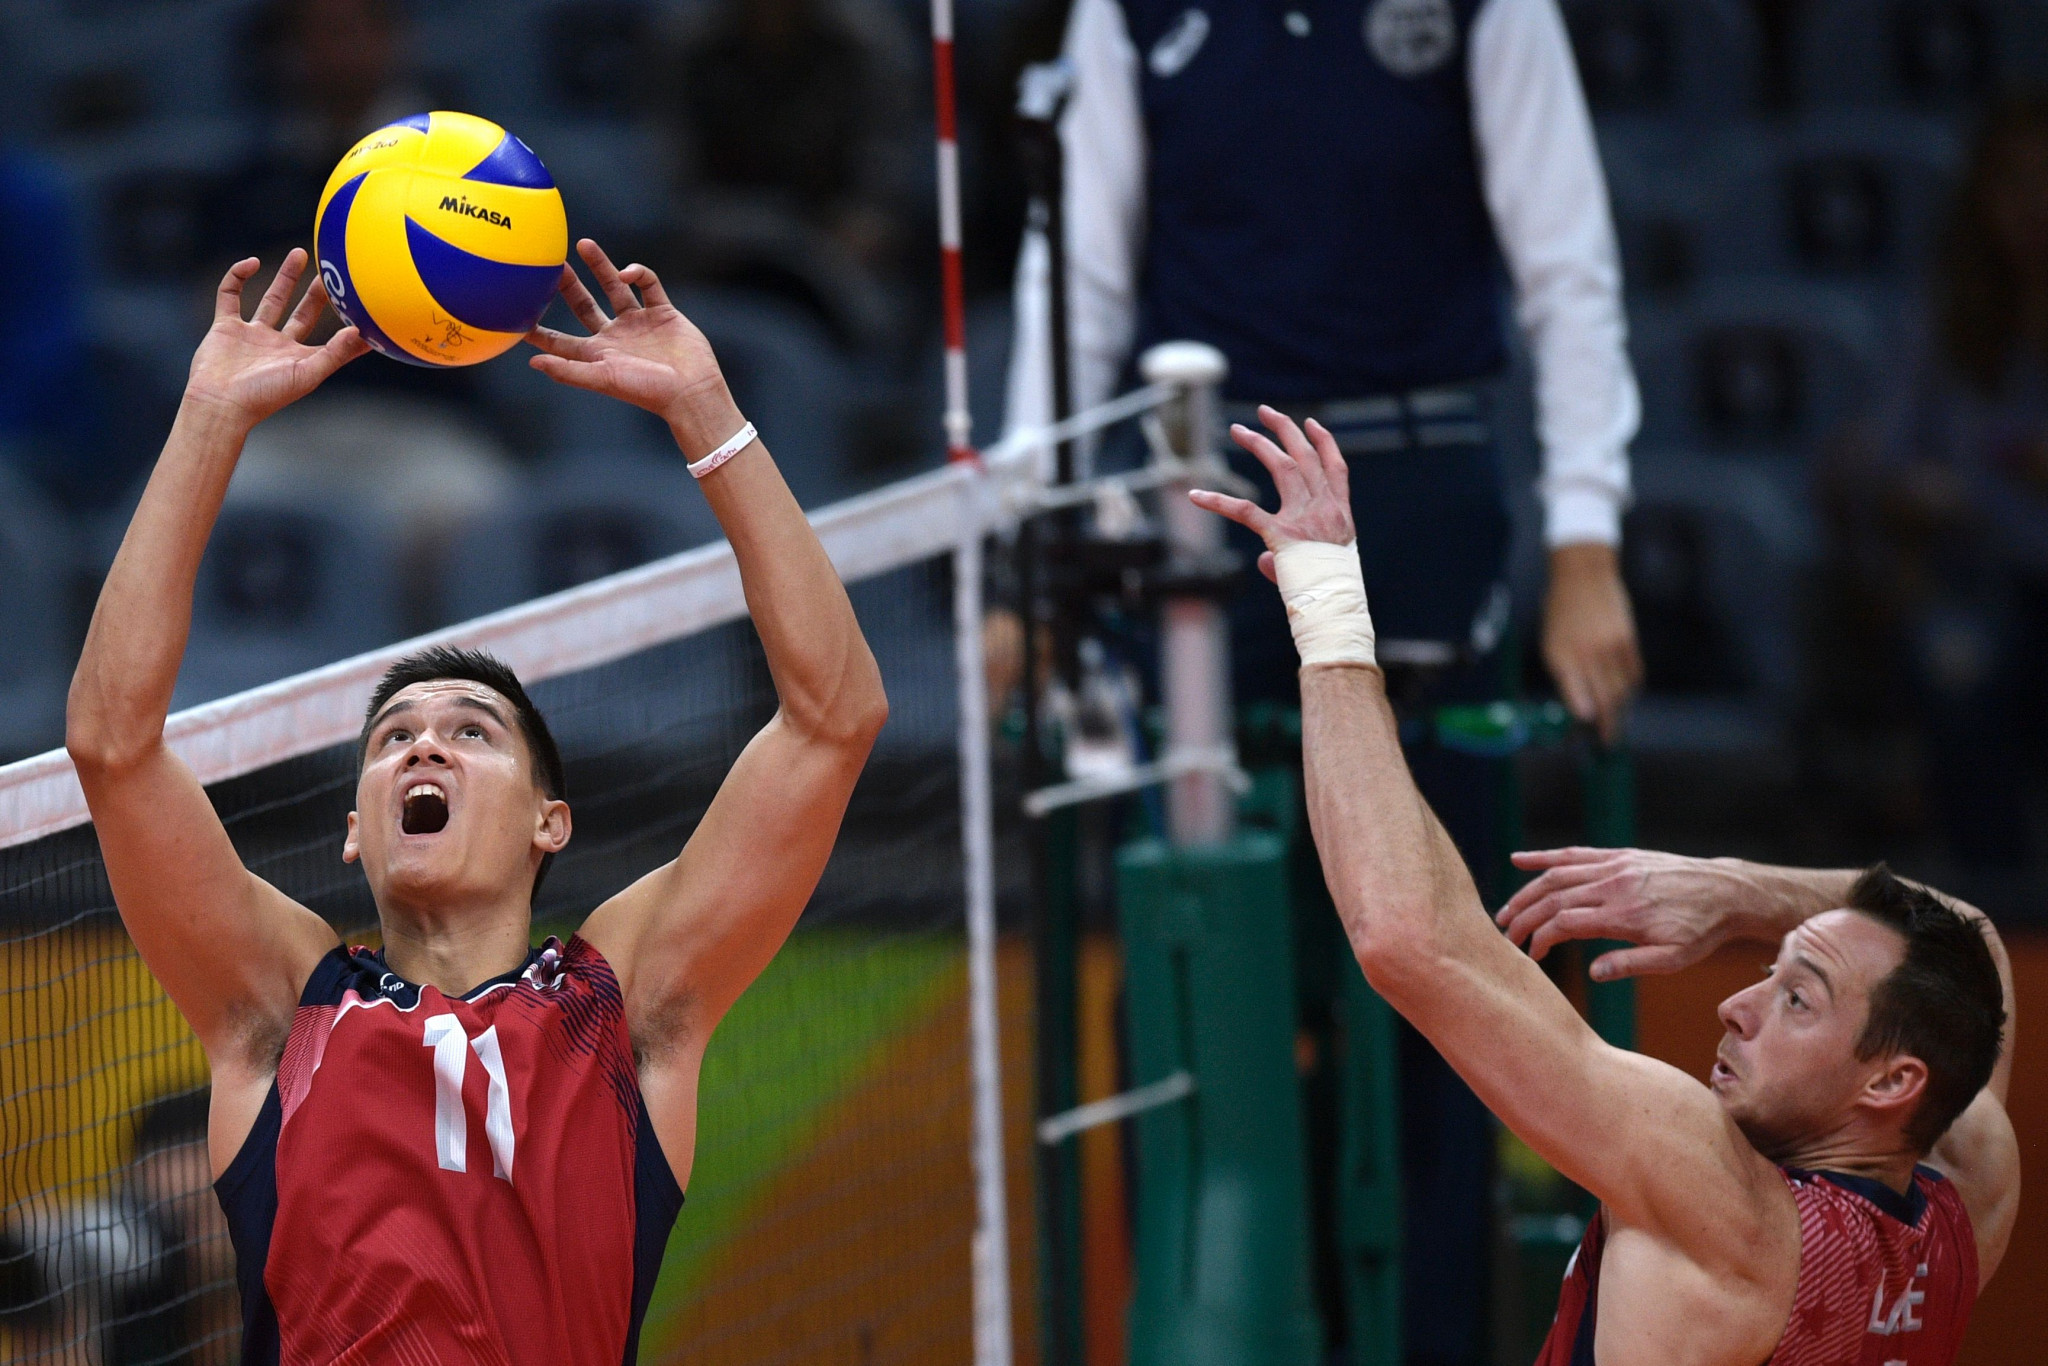 Volleyball Olympic champion David Lee, right, will make his beach debut in the qualification round ©Getty Images